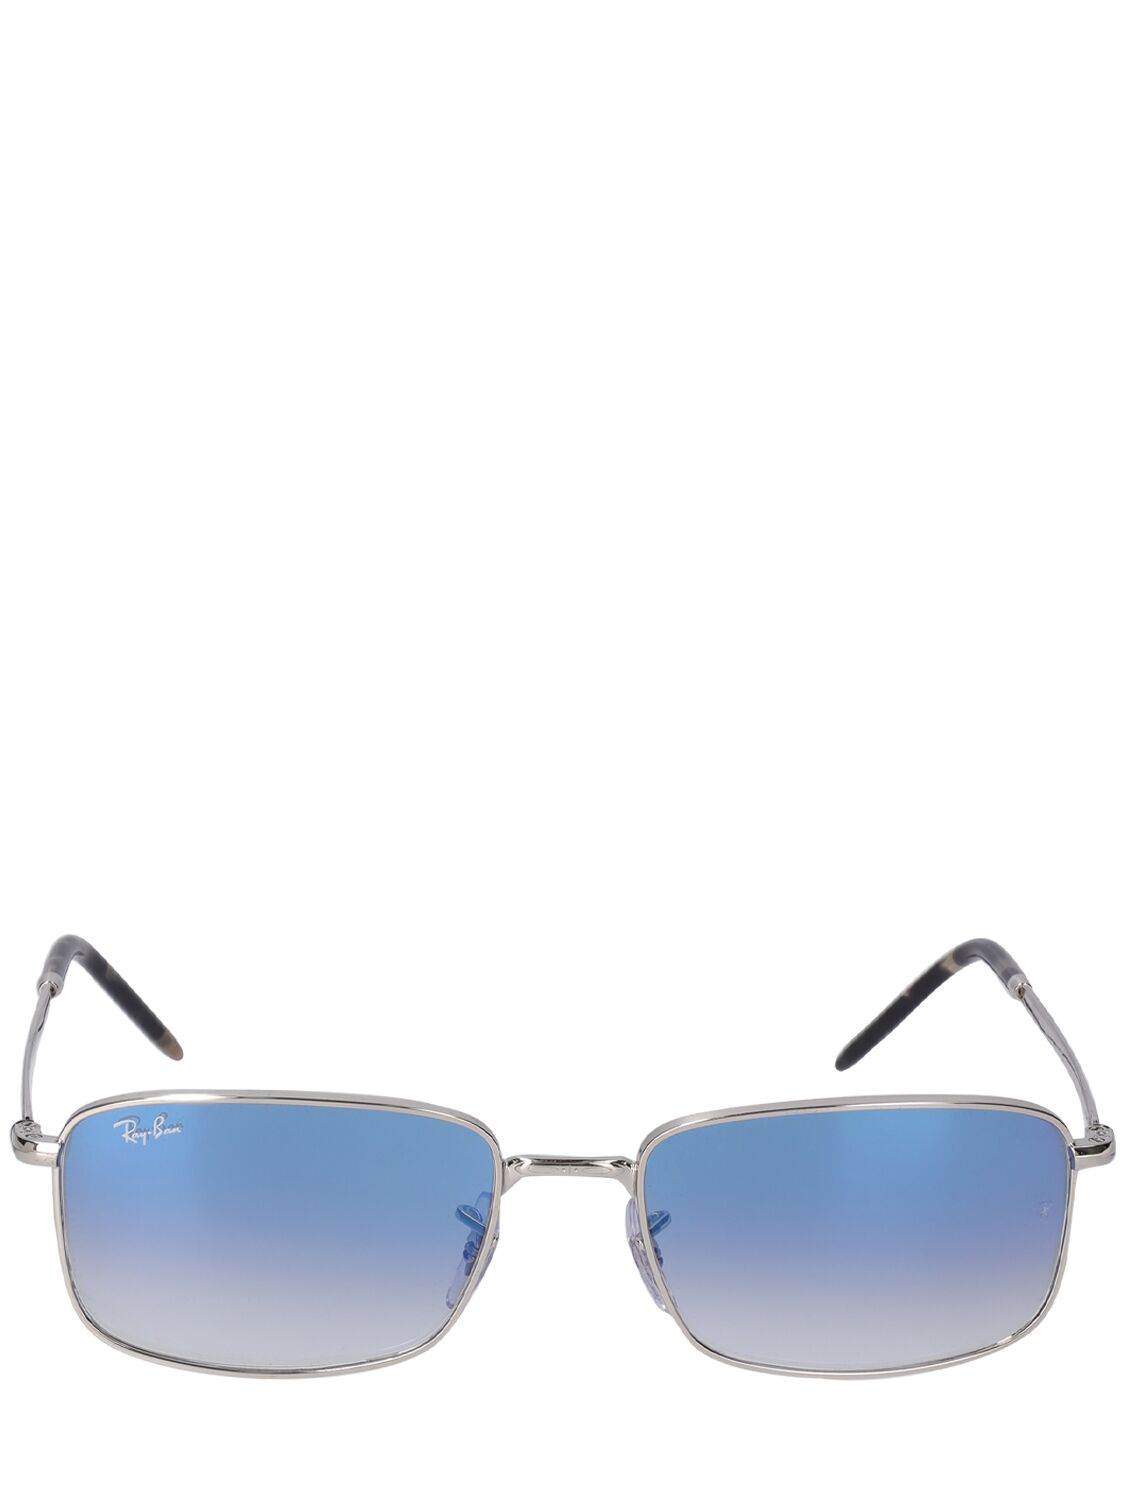 Ray Ban Icons Reinvention Metal Sunglasses In Metallic